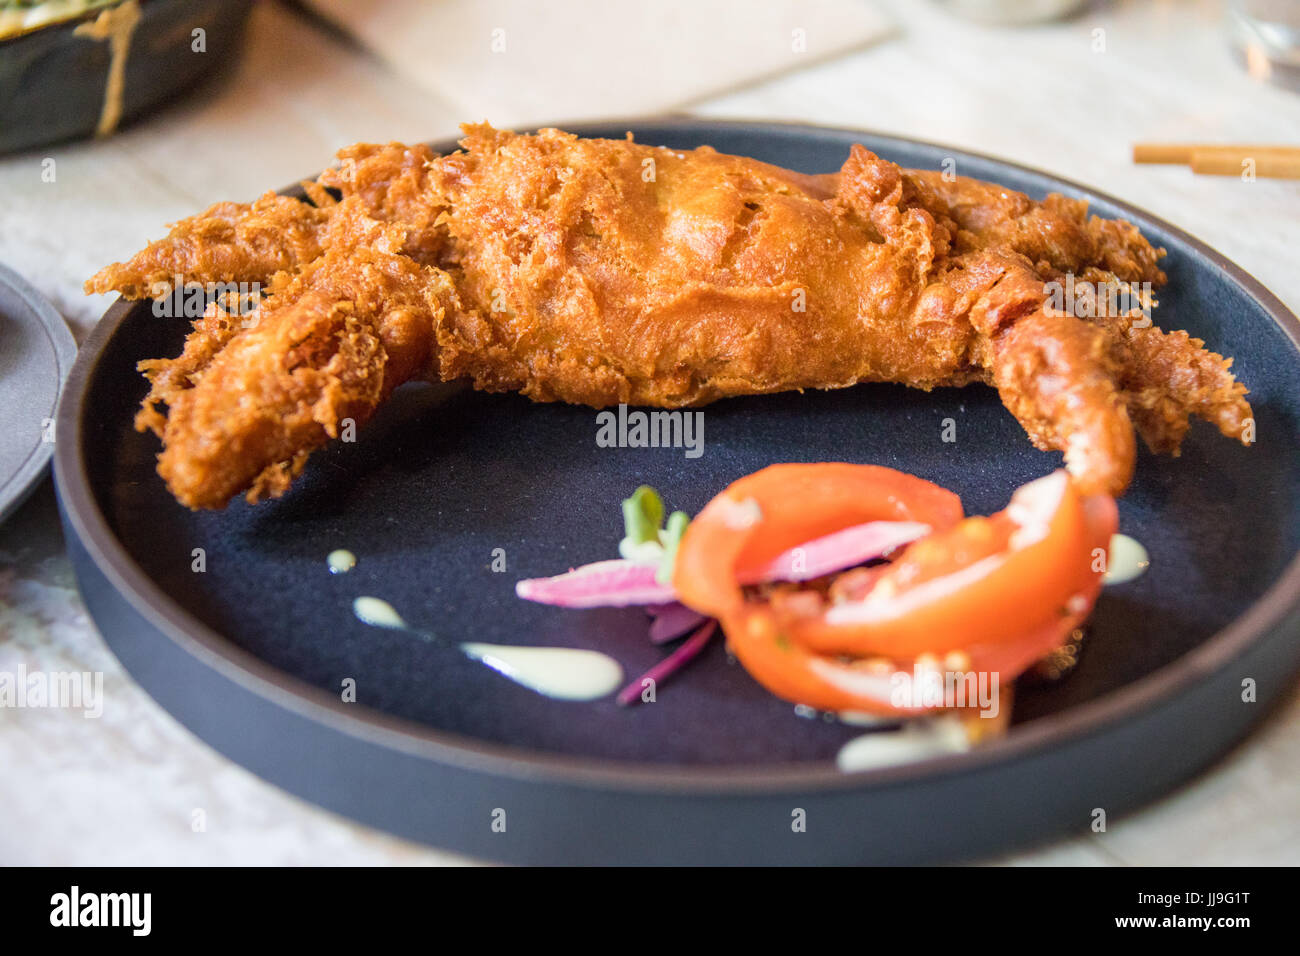 Soft shell crab wasabi remoulade, pickeled tomatoes at Thursday Kitchen, East Village, New York City Stock Photo